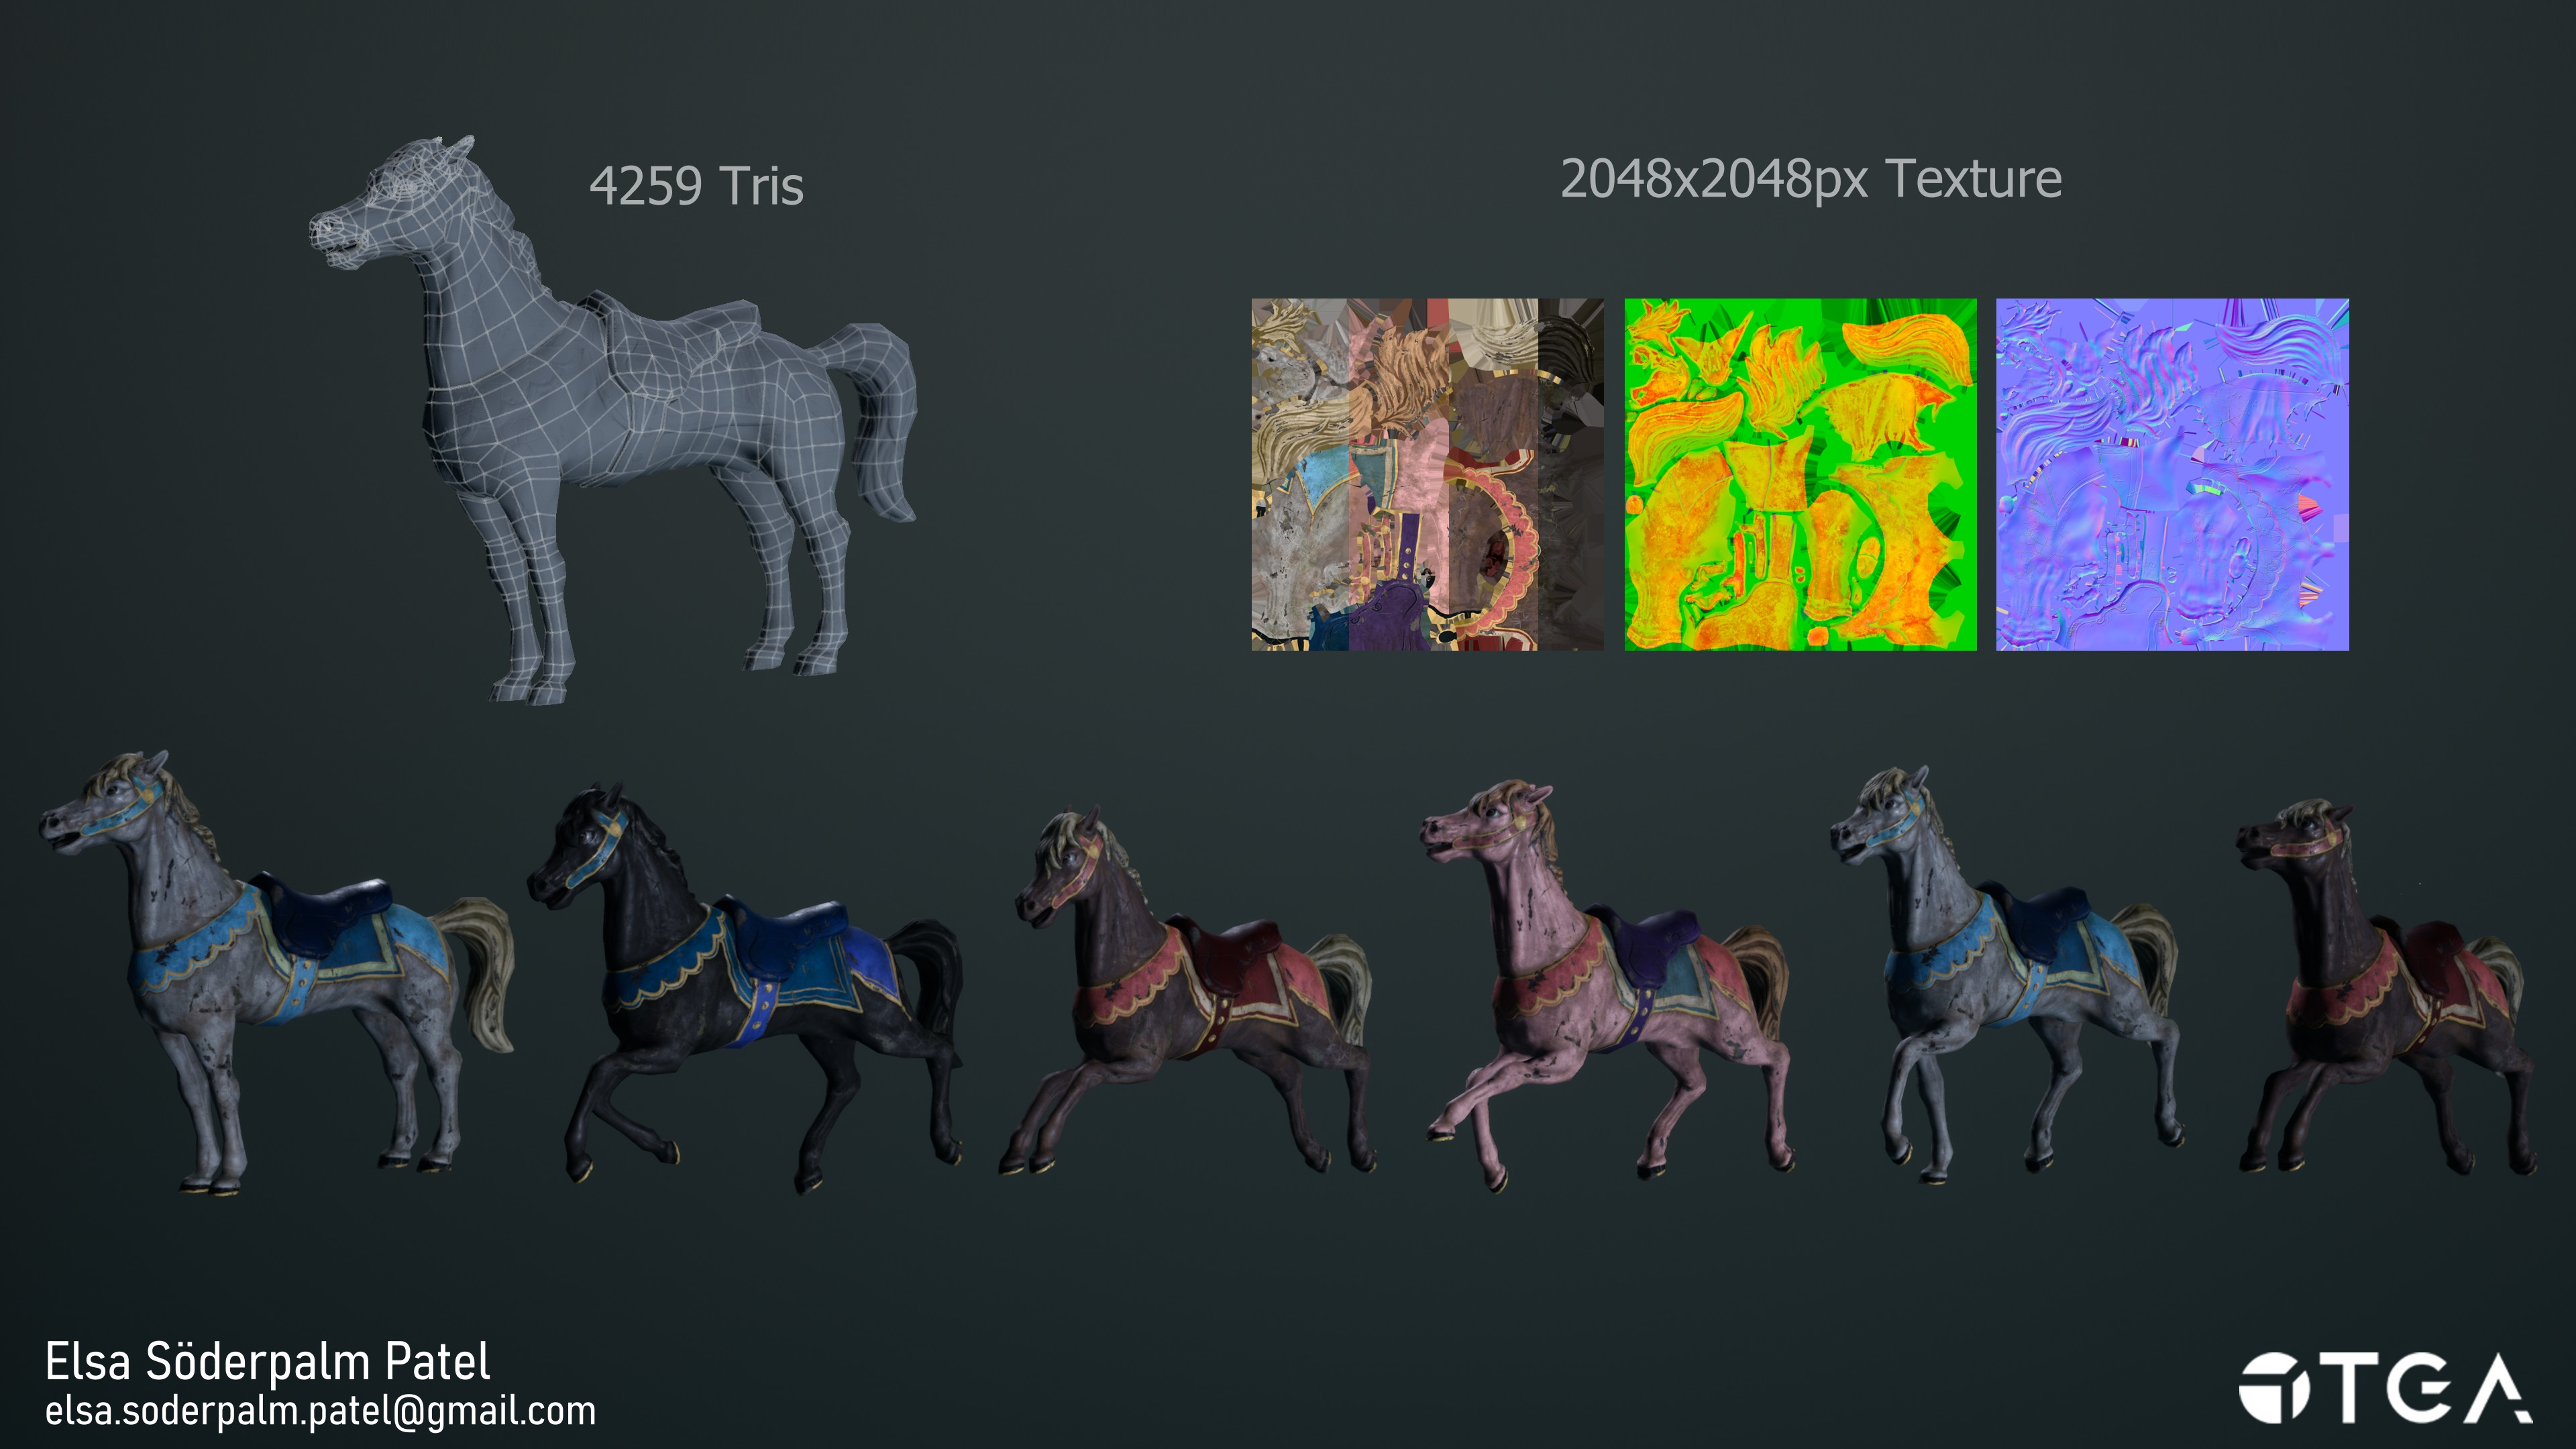 The horses uses the same model and were posed later for more variation.